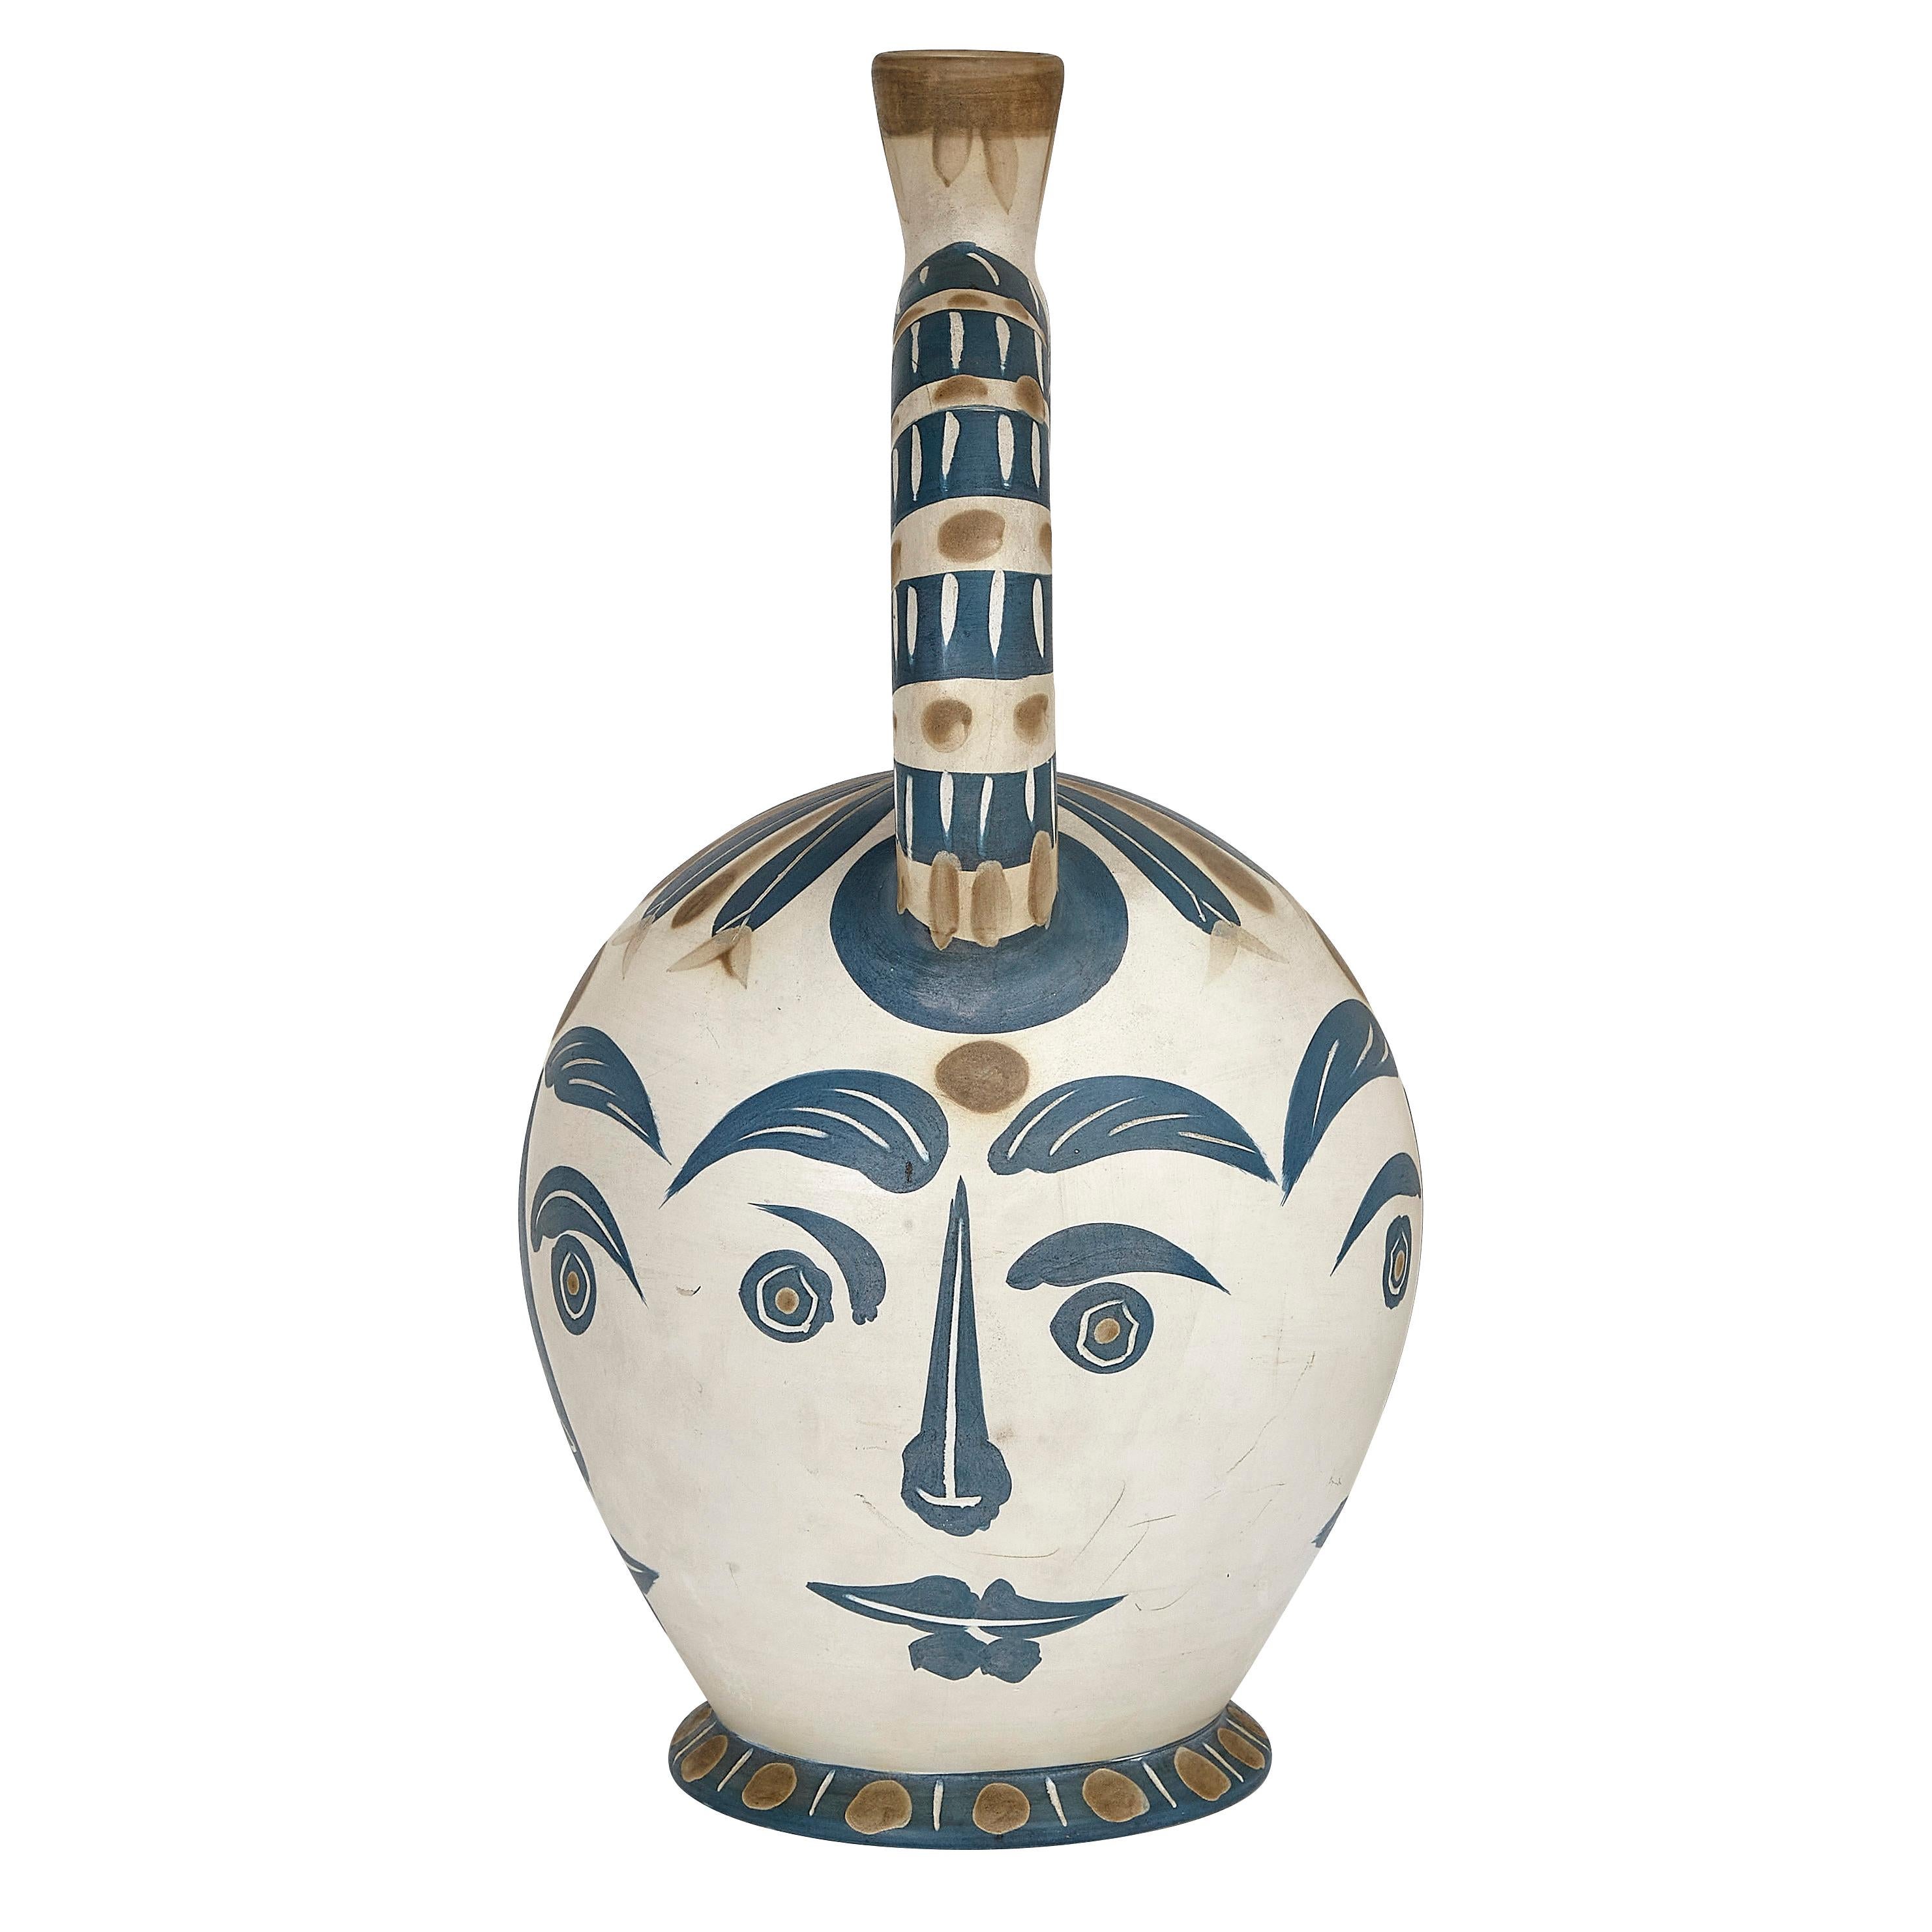 PABLO PICASSO (1881-1973) 
Vase aztèque aux quatre visage (A. R. 402)

Terre de faïence vase, painted in colors and partially glazed, 1957, numbered 73/100 and incised 'Edition Picasso' and 'Madoura', with the Edition Picasso an Madoura stamps. 